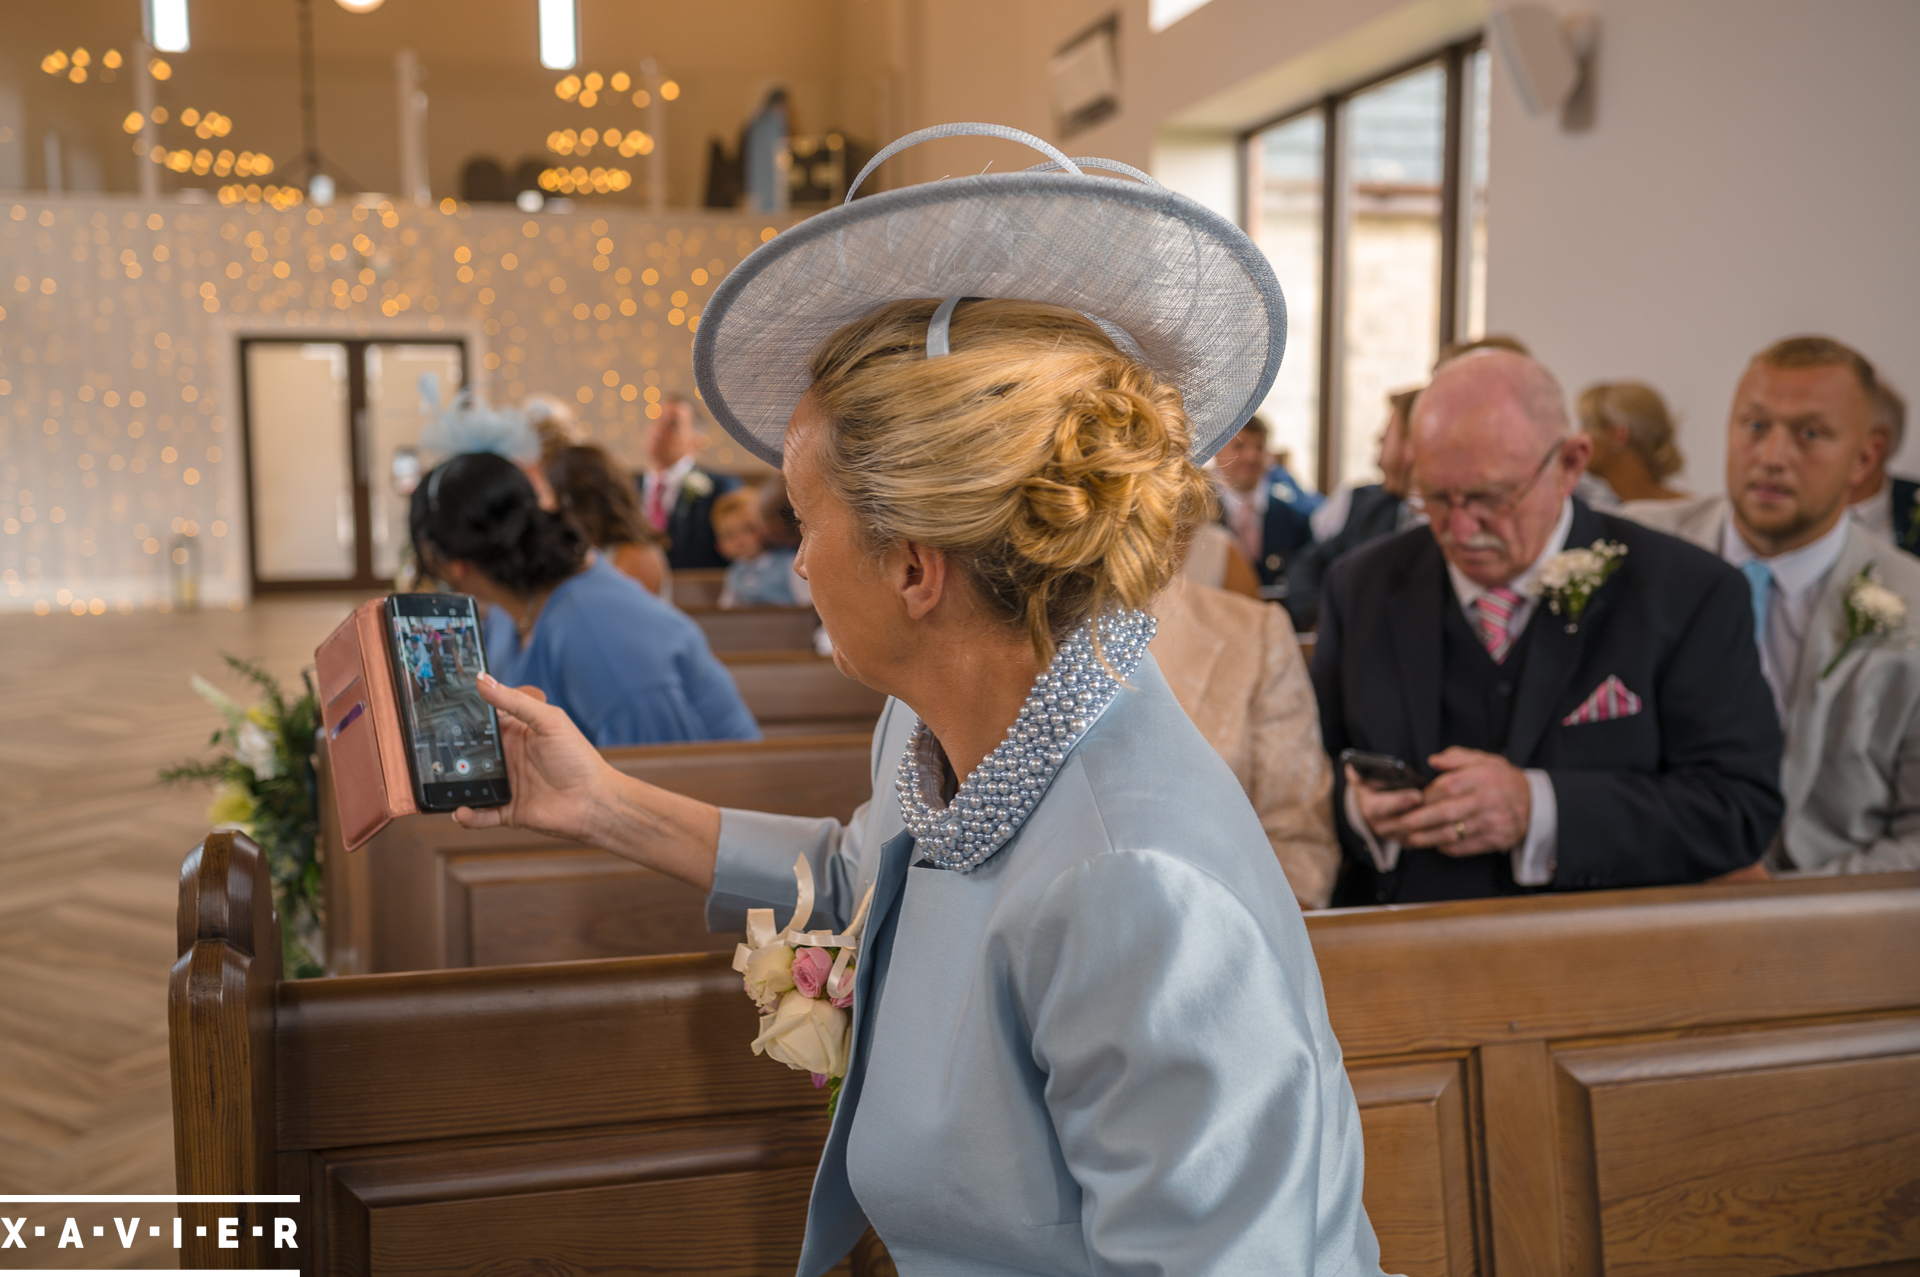 guest is holding her phone to take photos of the bride